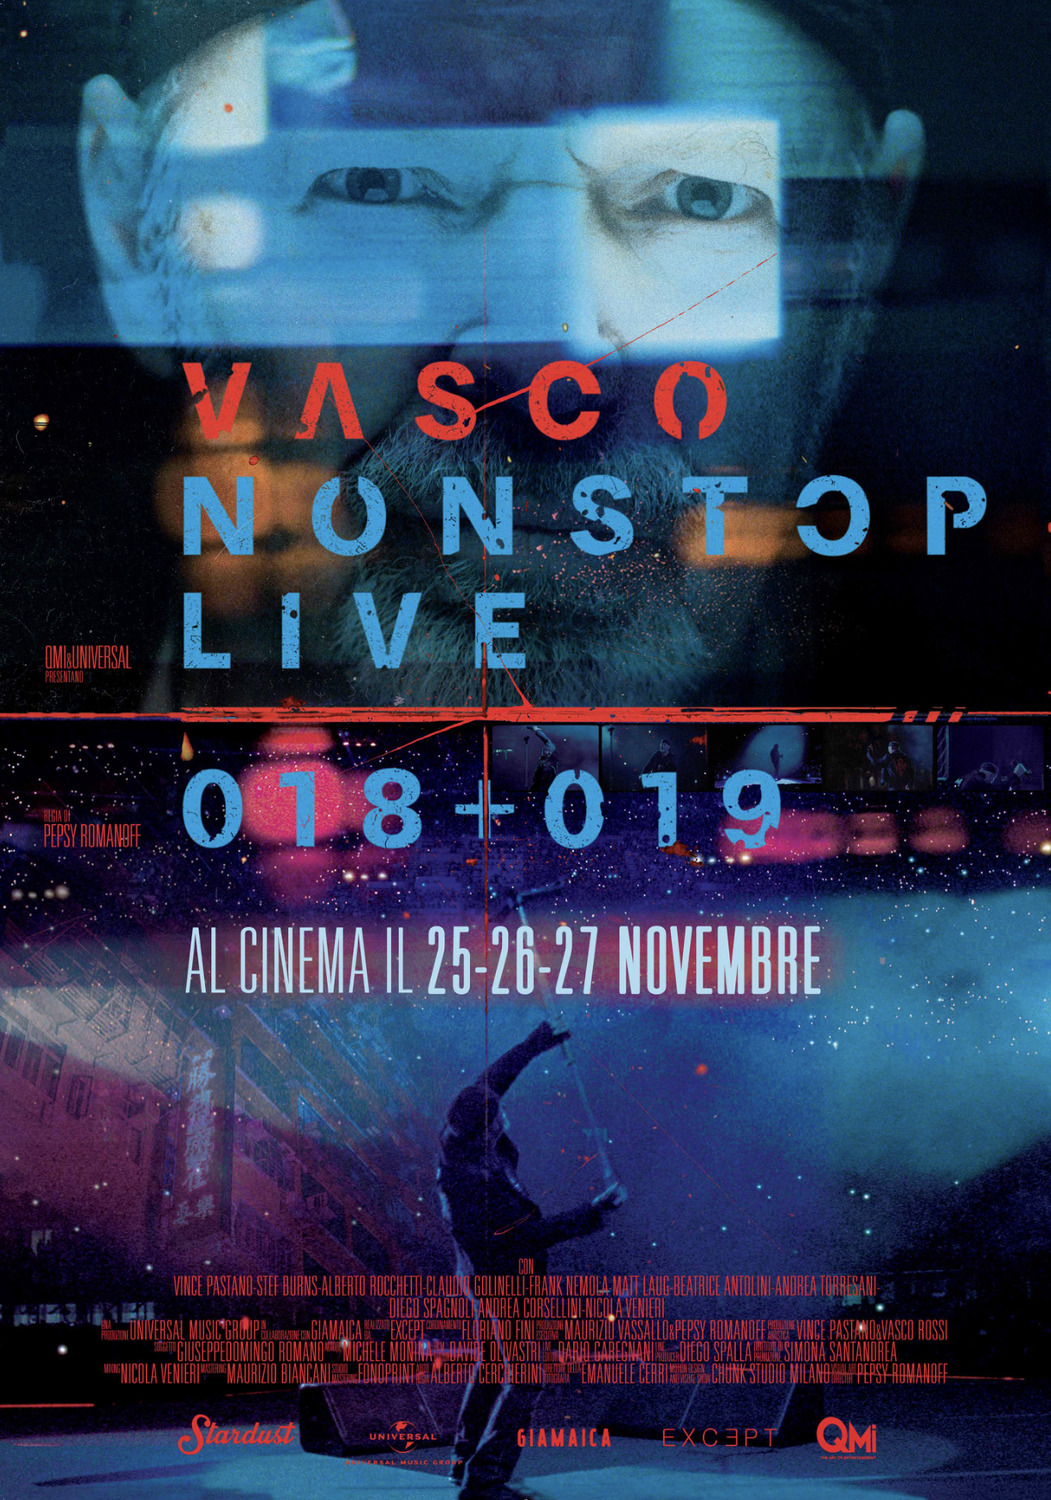 Extra Large Movie Poster Image for Vasco NonStop Live 018+019 